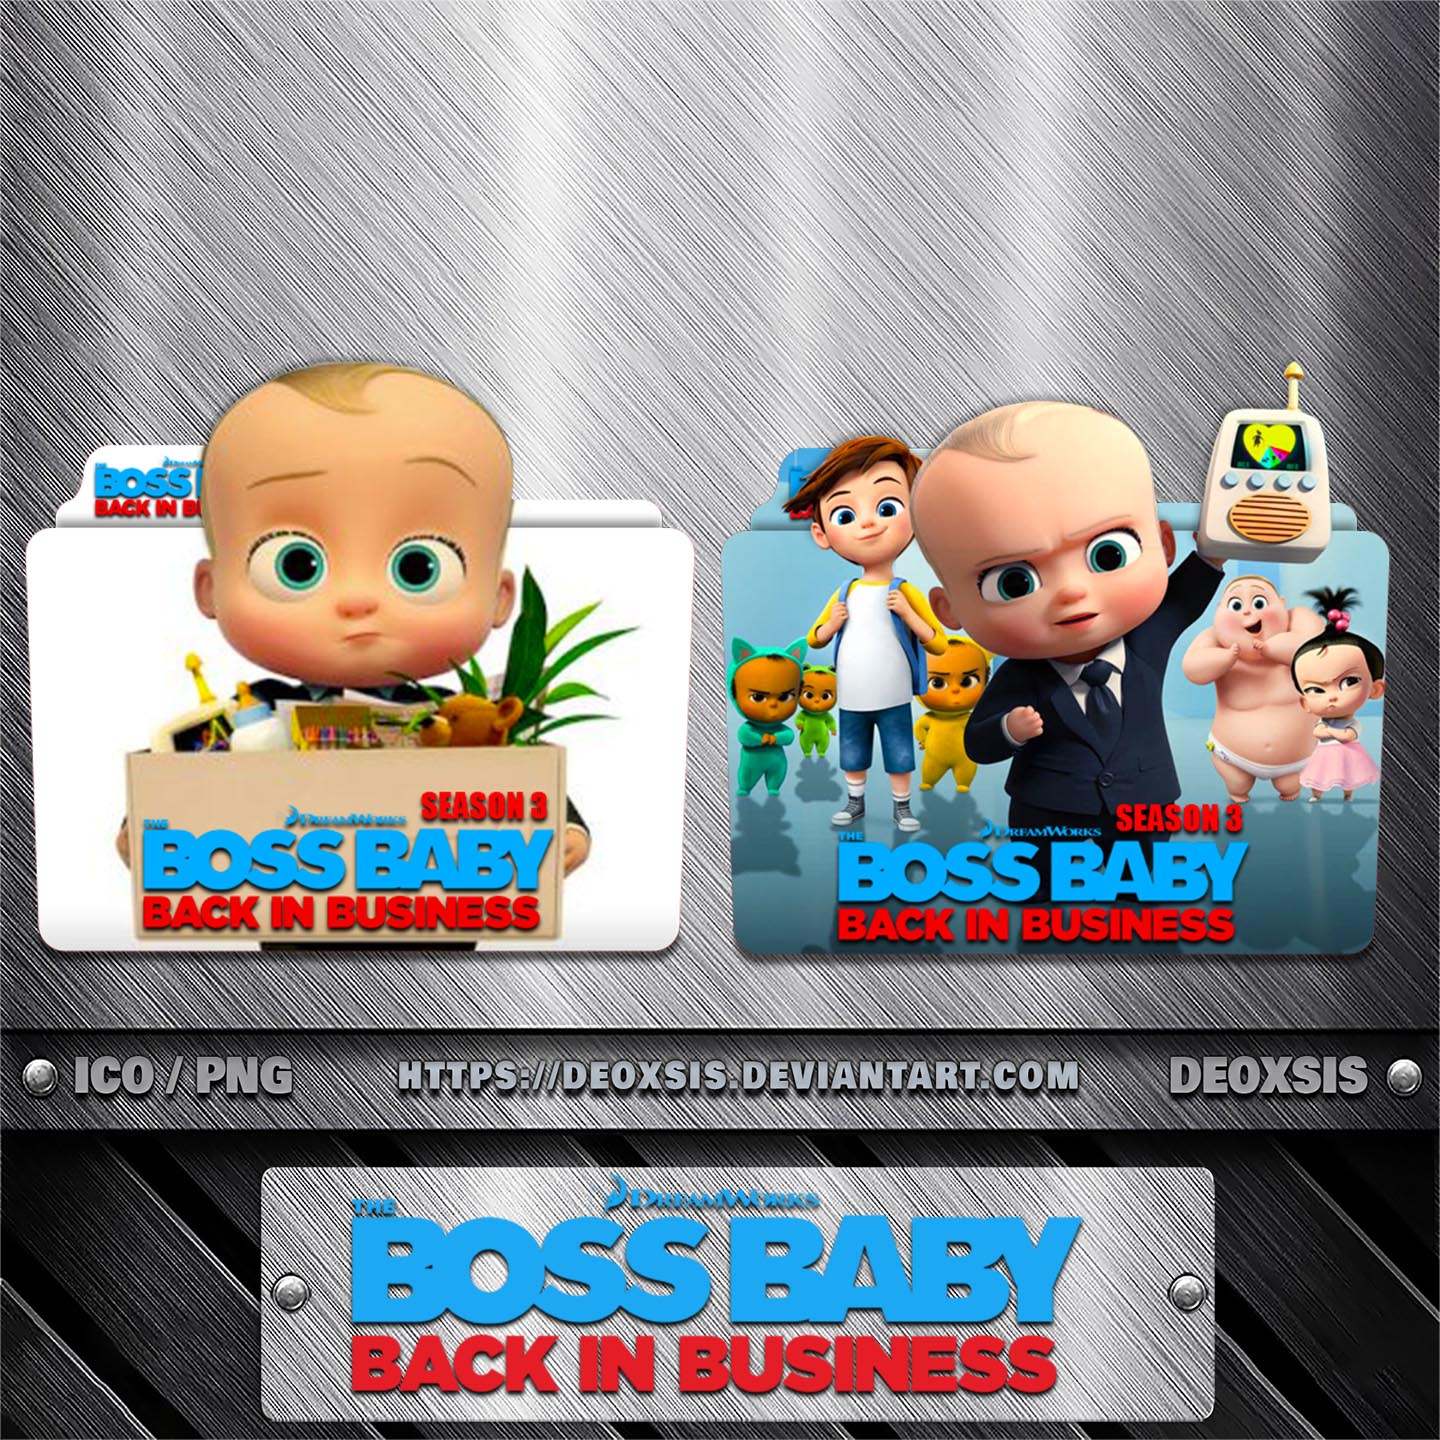 Boss baby Back In Business Season 3 by deoxsis on DeviantArt